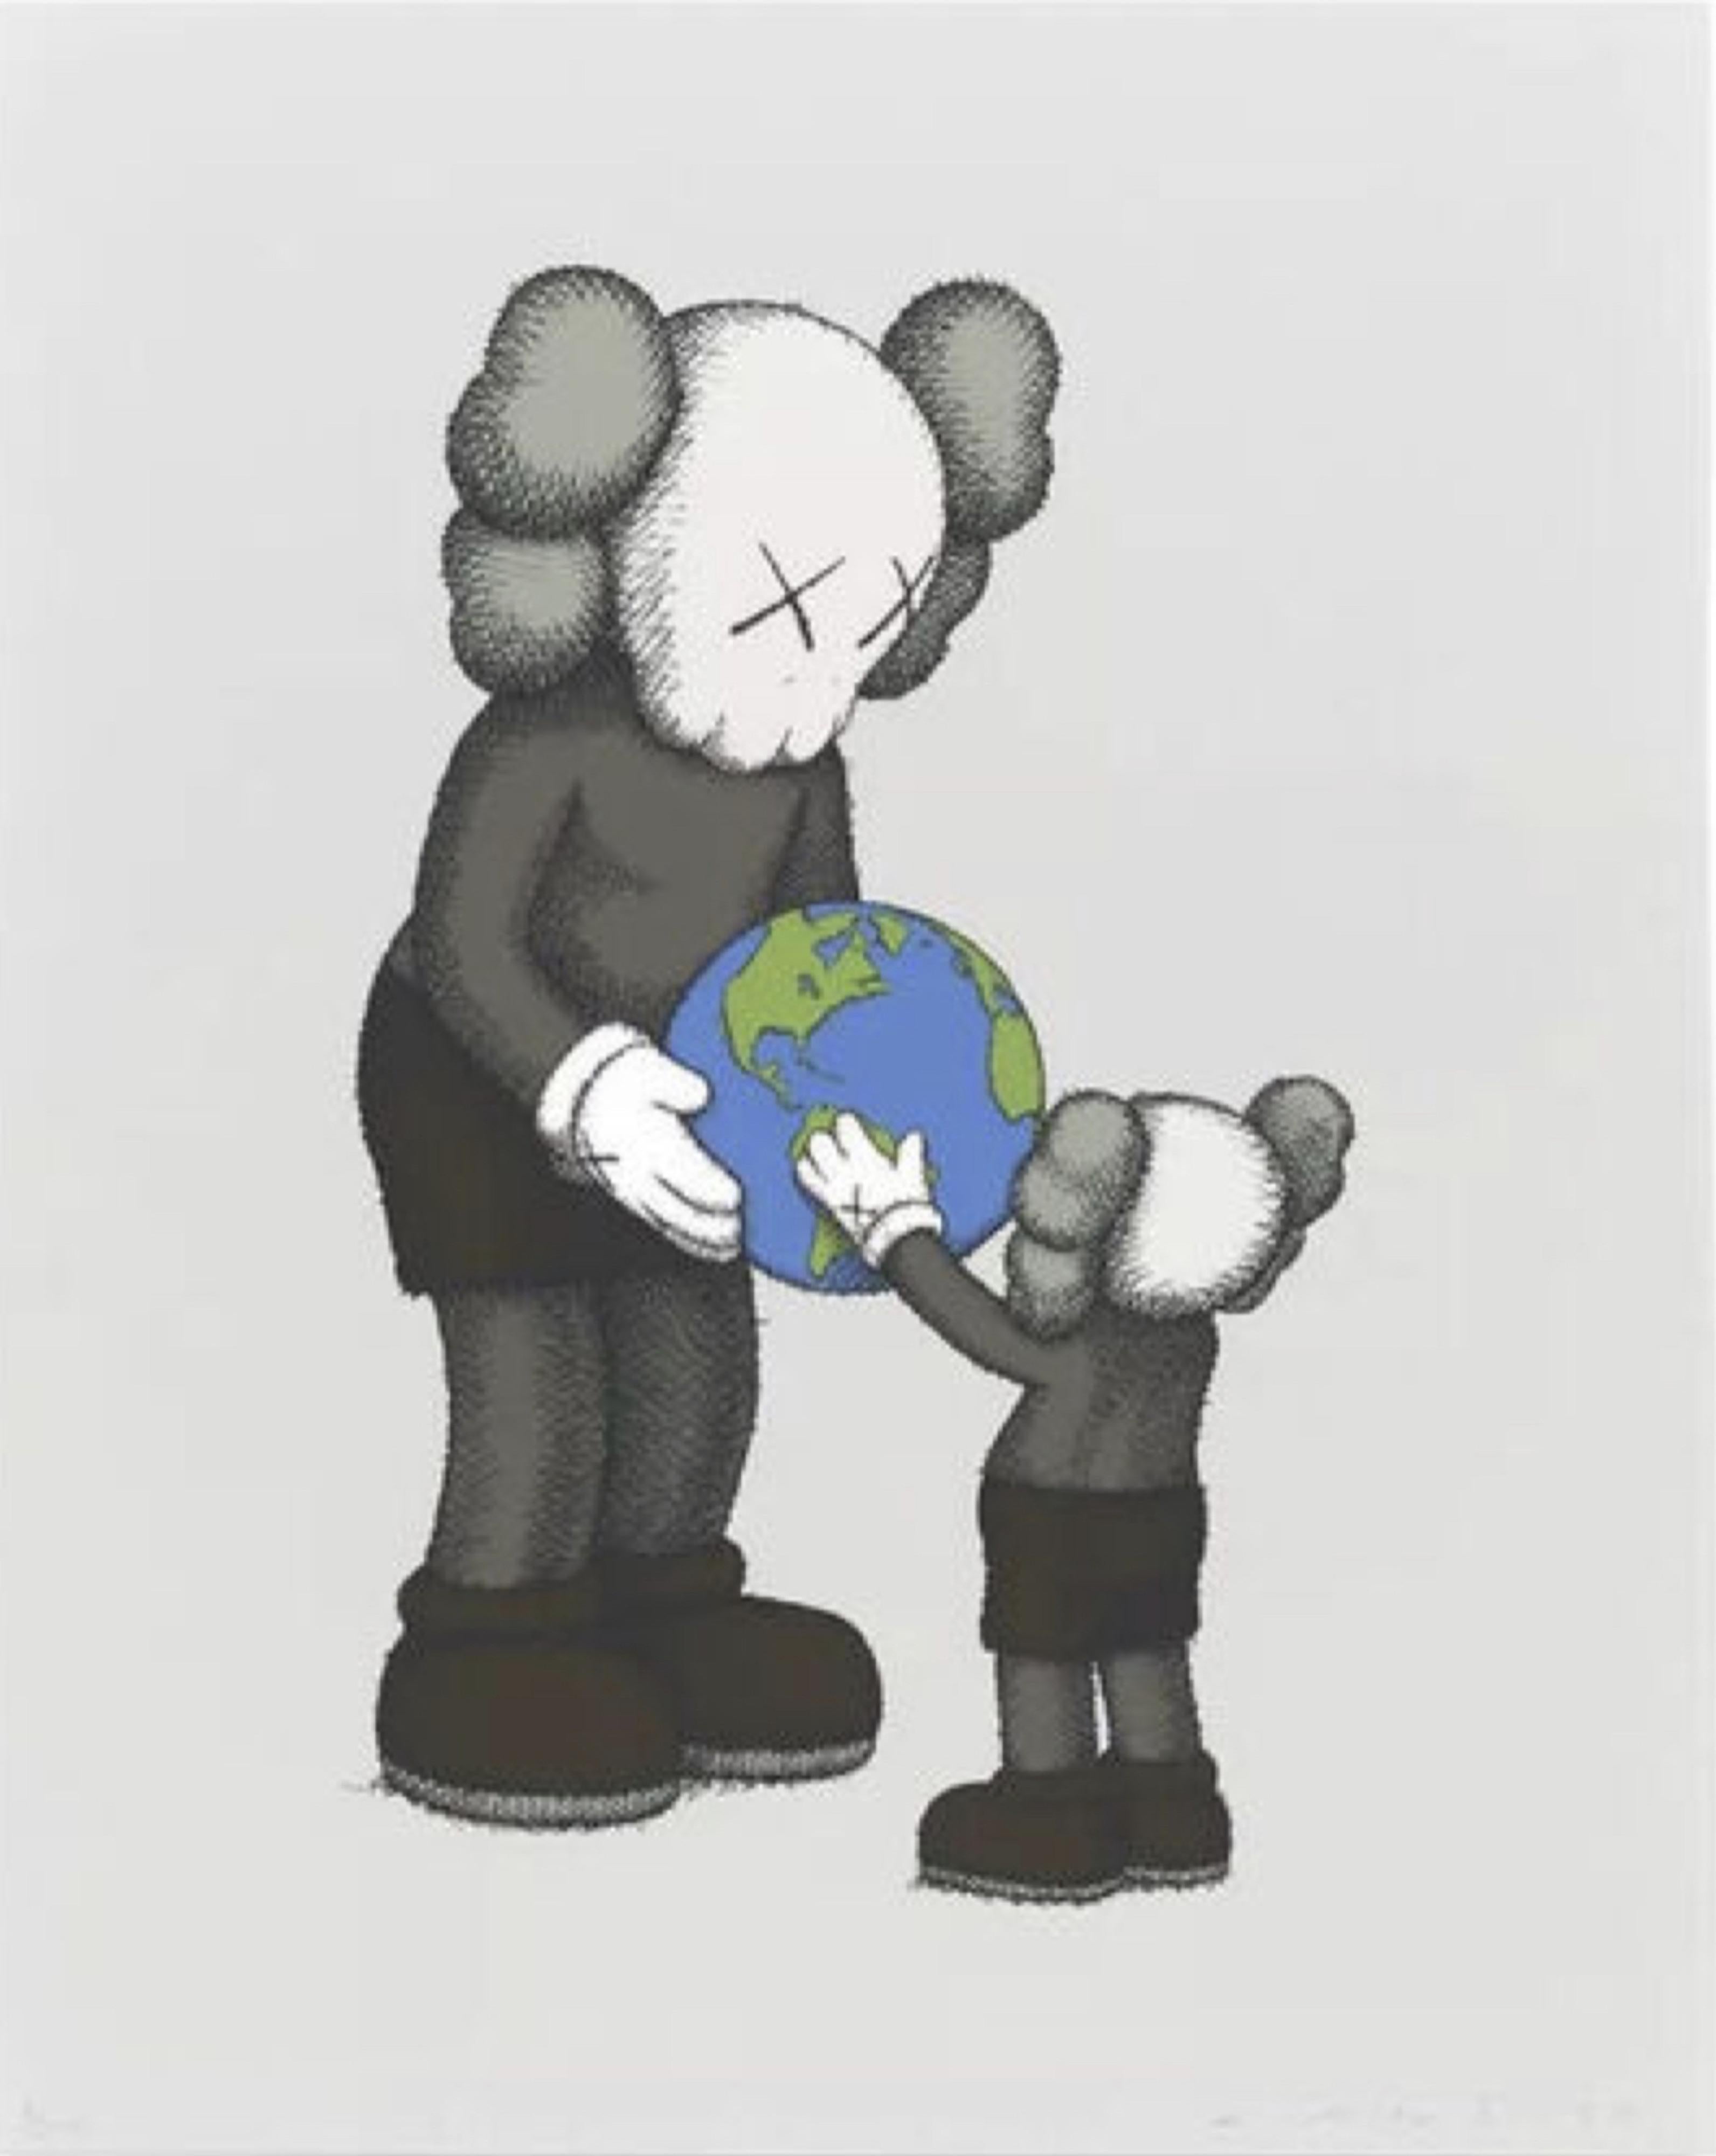 The promise - Print by KAWS